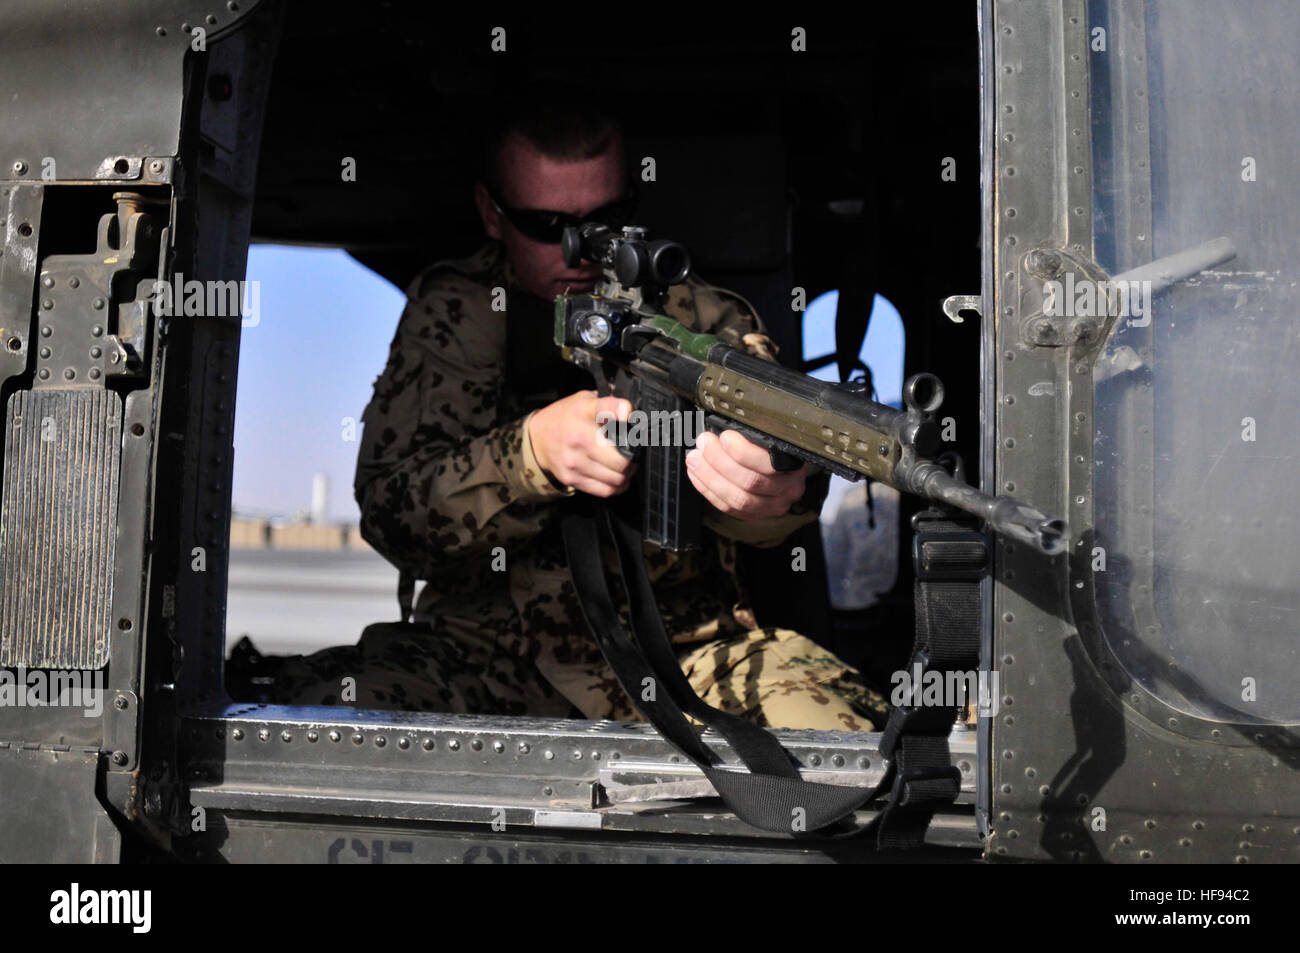 A German soldier looks through the scope mounted to his G3 rifle while aboard a UH-60L Blackhawk helicopter during an aircraft familiarization demonstration at Mazar-e-Sharif, Afghanistan, June 13, 2011. The Soldier is assigned to the International Security Assistance Force. (U.S. Navy photo by Mass Communication Specialist 2nd Class Nicholas A. Garratt/Released) Bundeswehr Soldat G3 Afghanistan Stock Photo